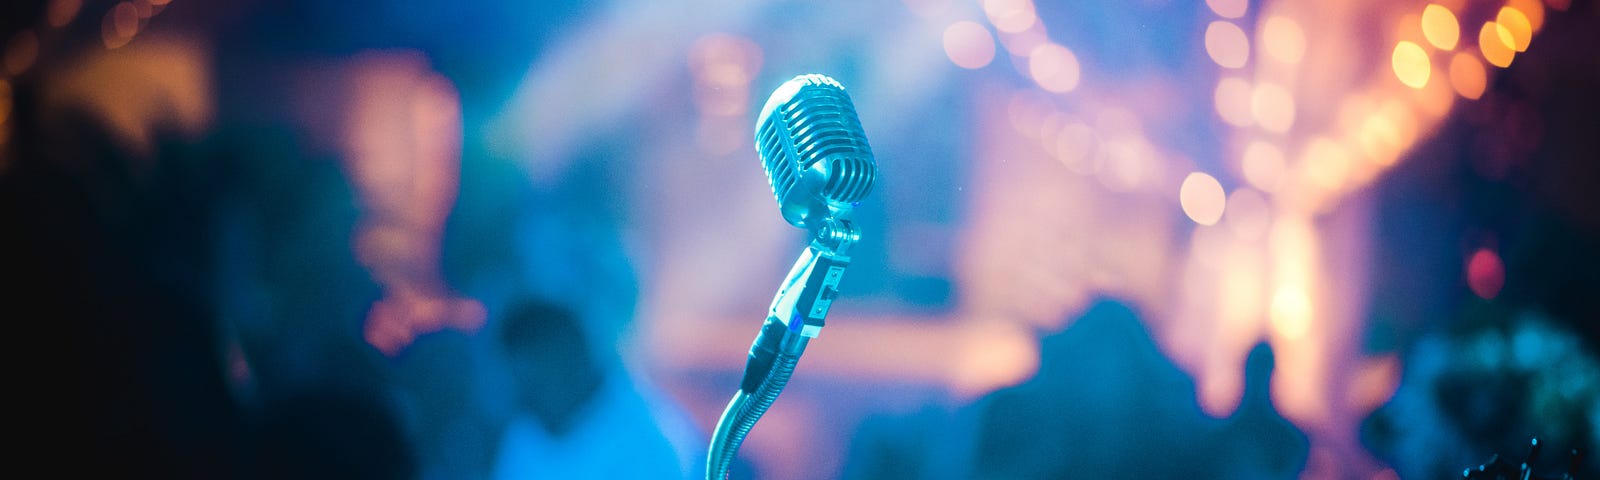 A microphone stand against a blurred show venue background